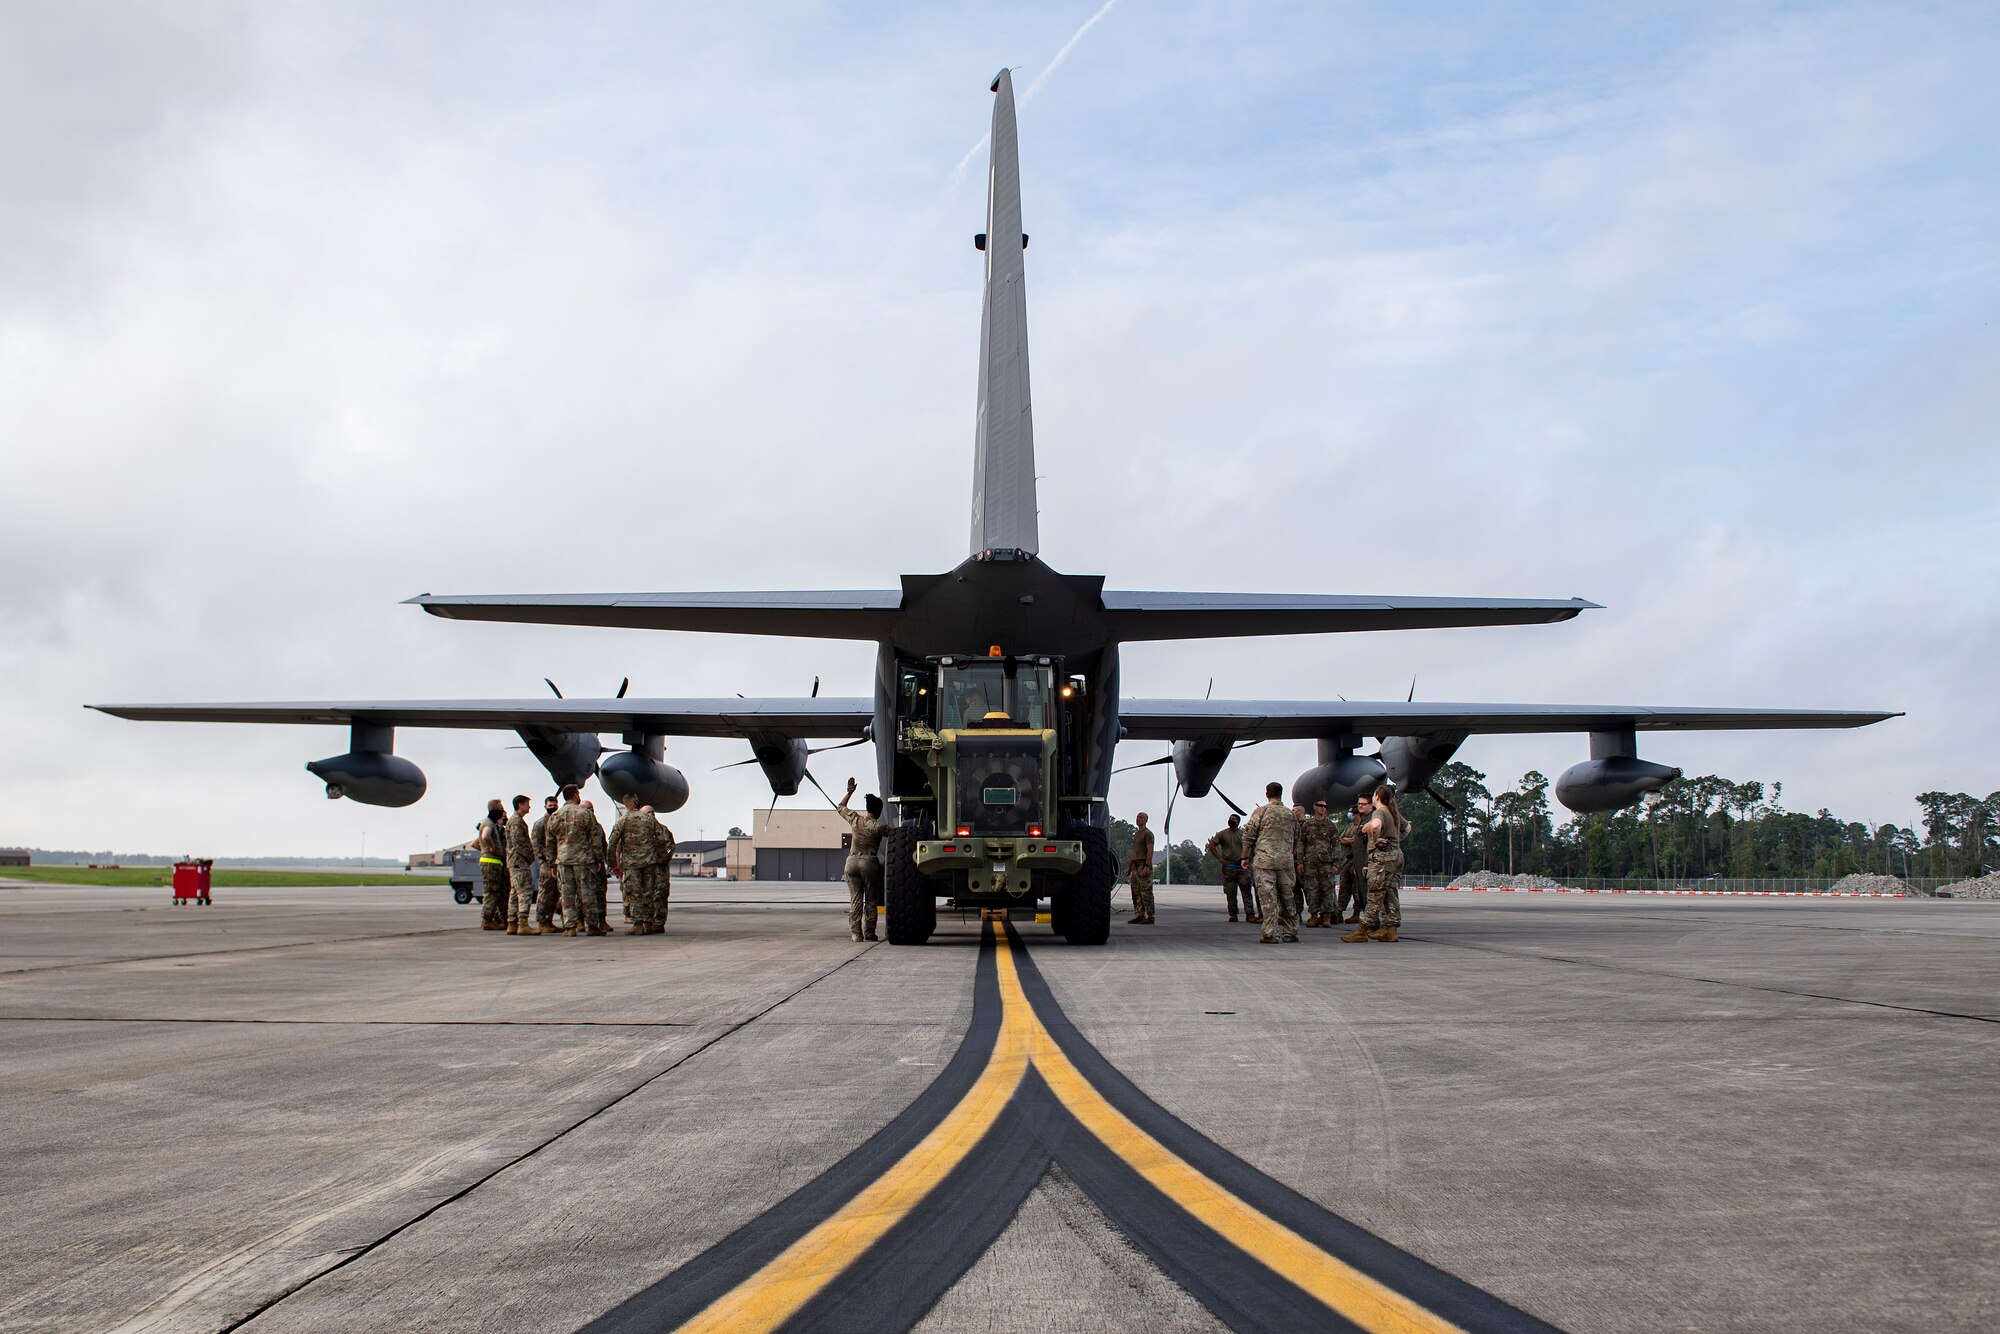 A U.S. Air Force Airman from the 23rd Logistics Readiness Squadron loads pallets onto an HC-130J Combat King II cargo aircraft at Moody Air Force Base, Georgia, Aug. 28, 2021. More than 160 Airmen from the 822nd Base Defense Squadron deployed to Holloman Air Force Base, New Mexico, , in support of Task Force – Holloman. The Department of Defense, through U.S. Northern Command, and in support of the Department of Homeland Security, is providing transportation, temporary housing, medical screening, and general support for at least 50,000 Afghan evacuees at suitable facilities, in permanent or temporary structures, as quickly as possible. This initiative provides Afghan personnel essential support at secure locations outside Afghanistan. (U.S. Air Force photo by Senior Airman Jasmine Barnes)